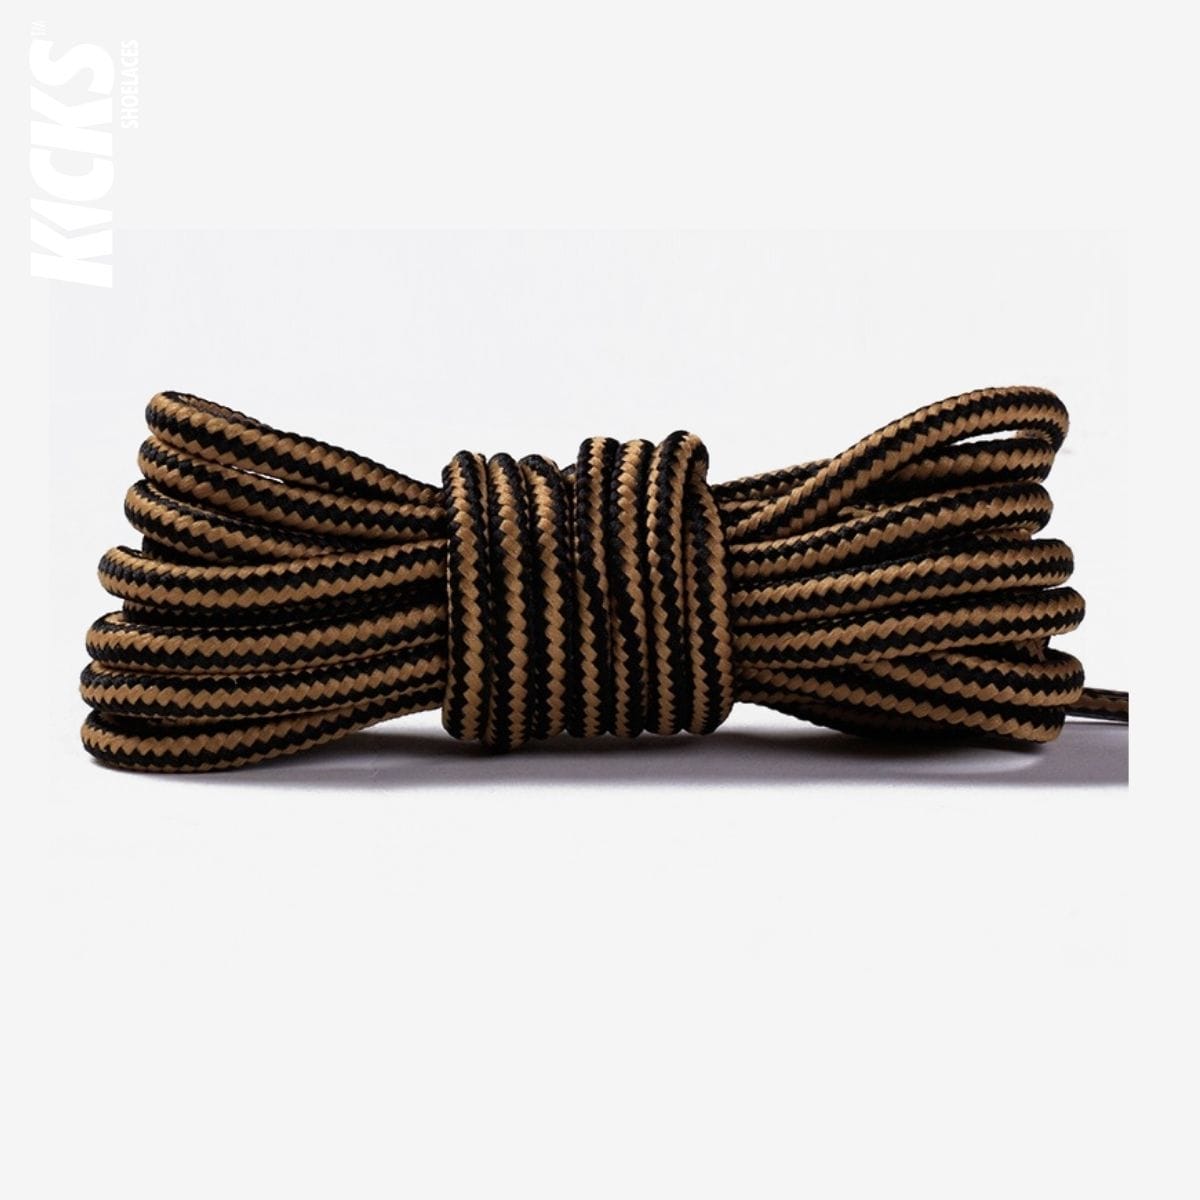 striped-two-color-shoelaces-for-casual-shoes-in-earth-brown-and-black